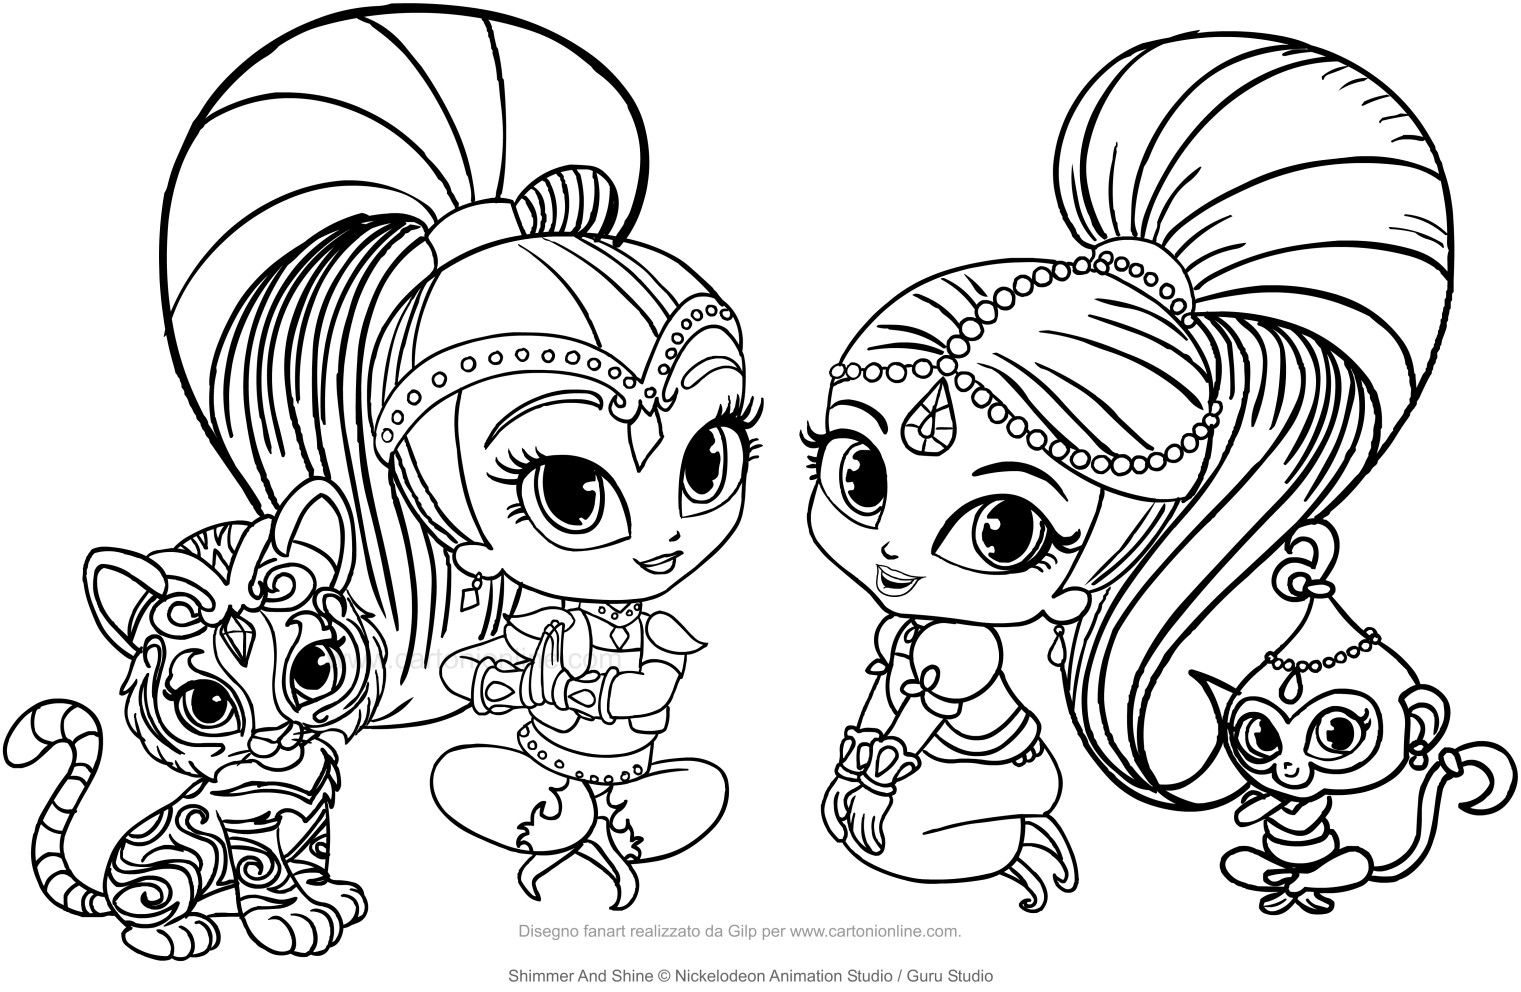 Coloring Pages : Shimmerd Shine Coloring Book Pages Games ...